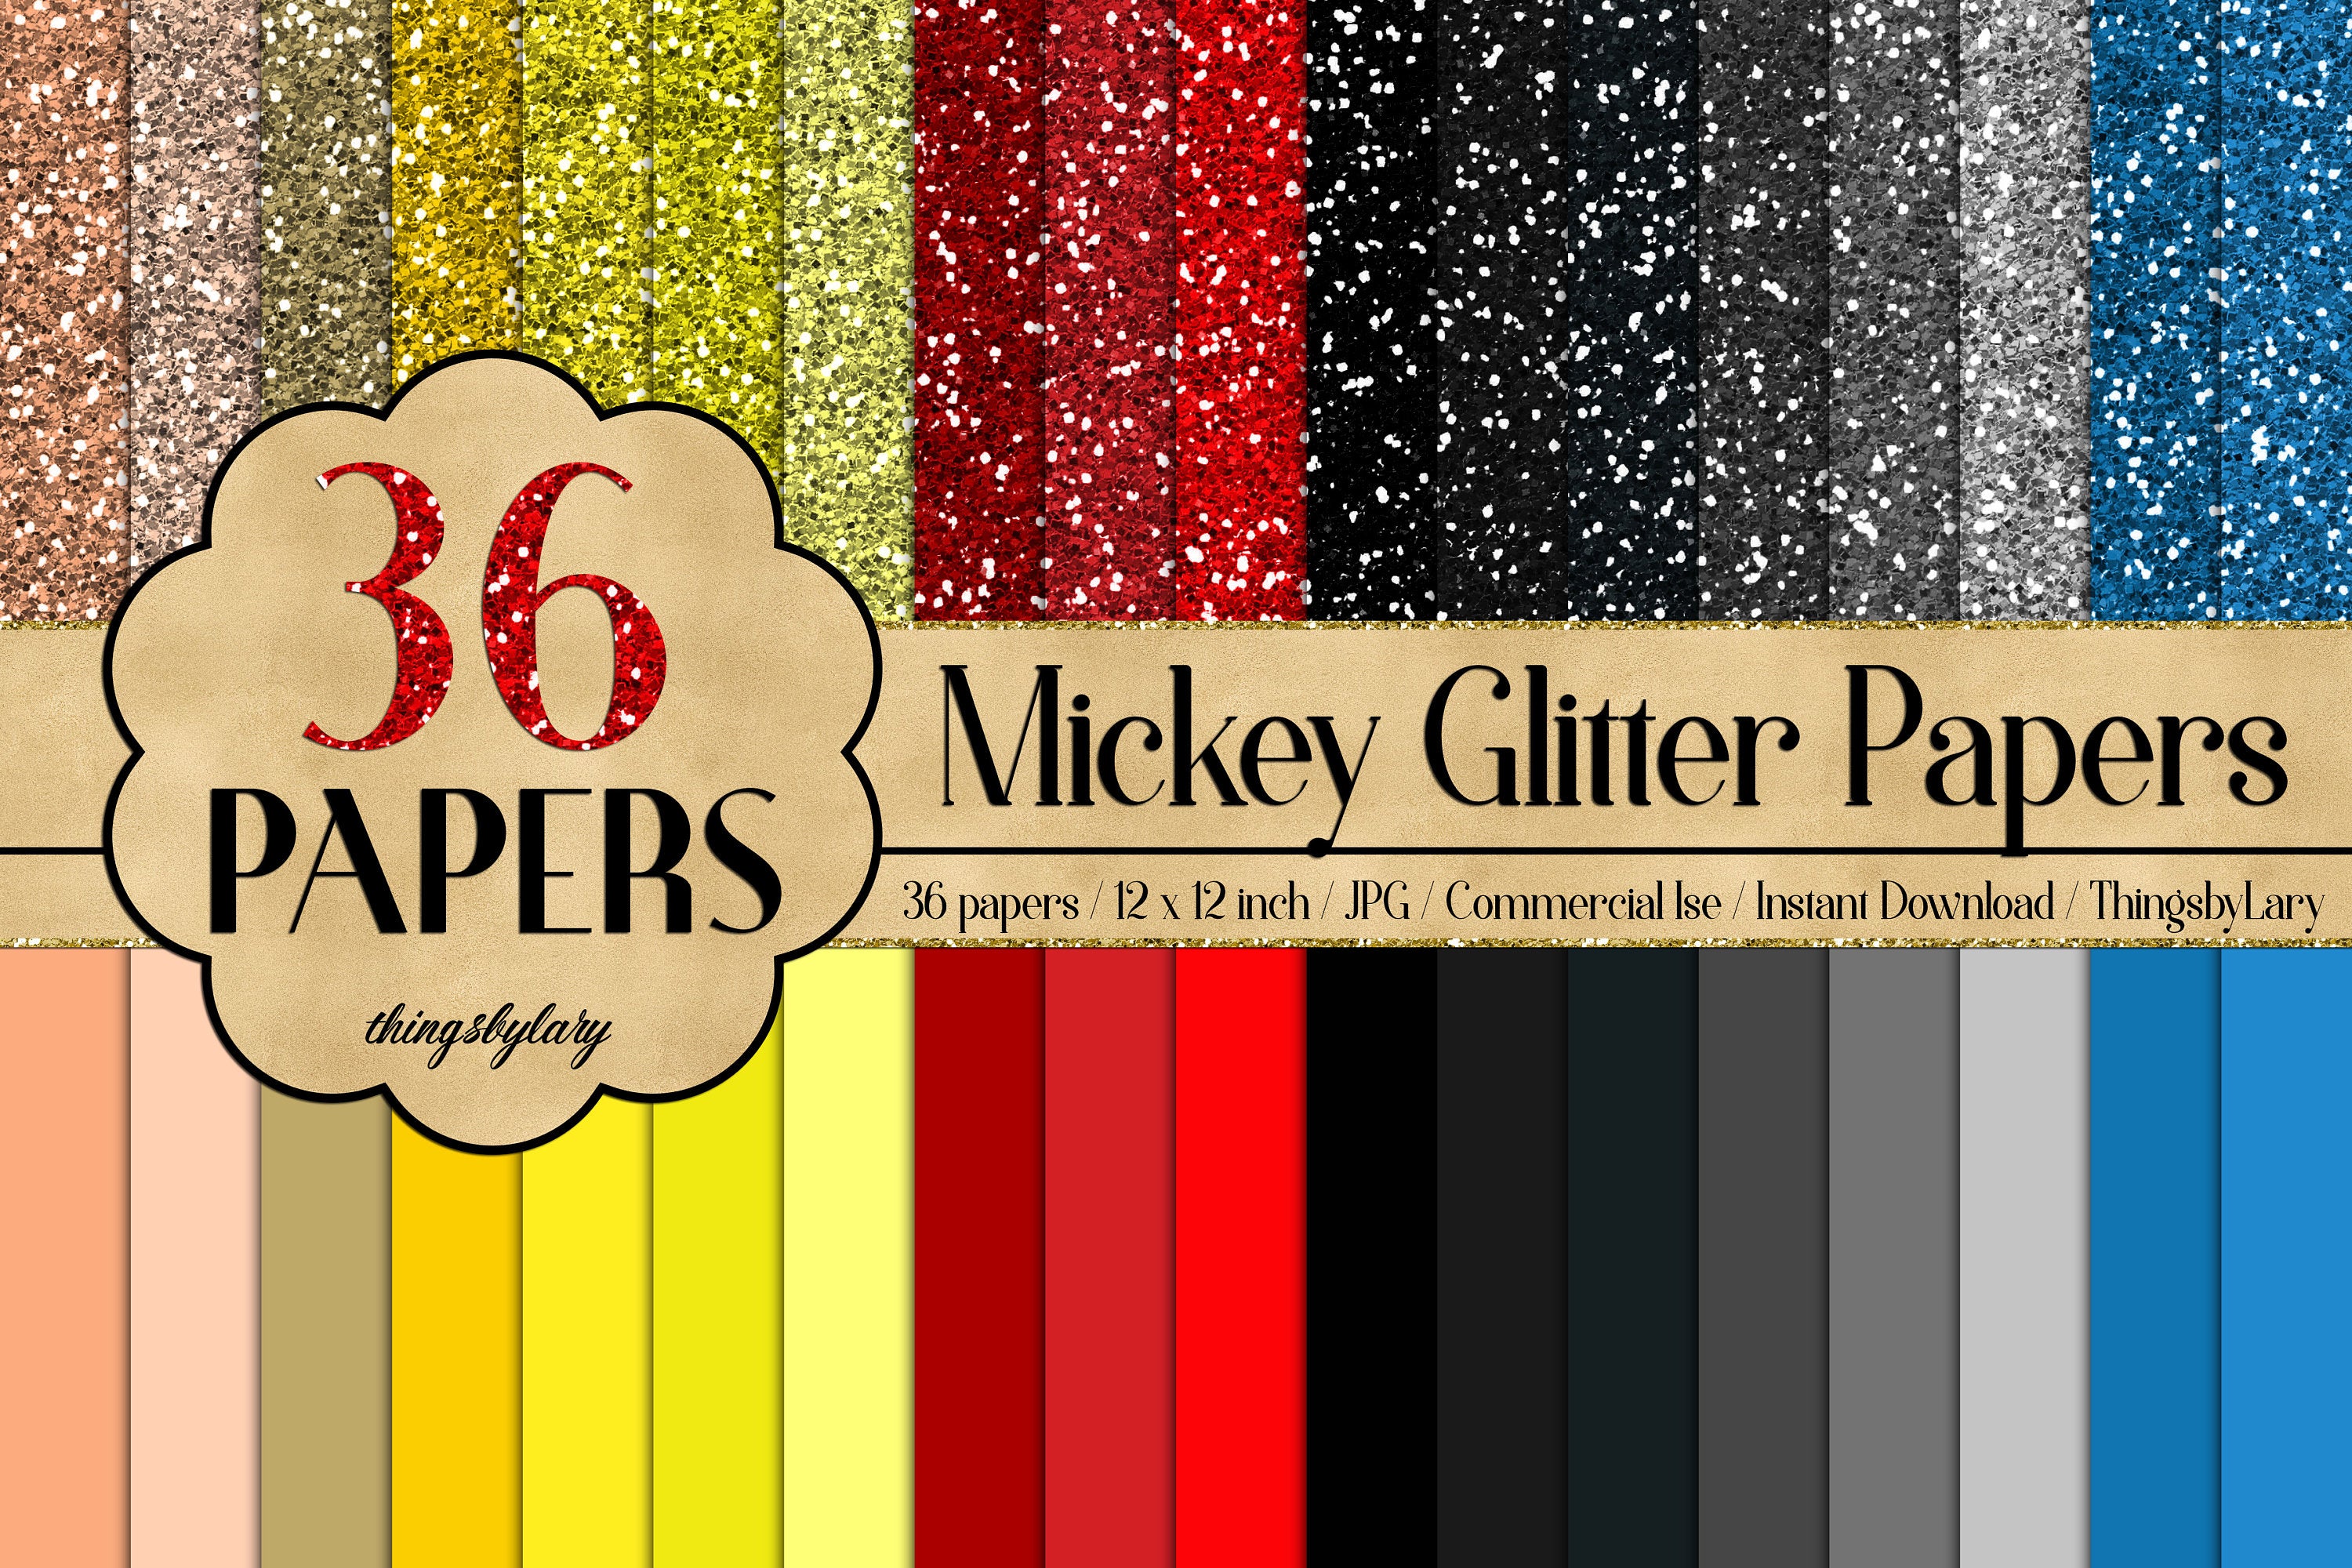 36 Red Black Yellow Glitter Papers, Cartoon Mouse Glitter Paper, Cartoon Mouse Solid Color Paper,300 Dpi Instant Download, Commercial Use